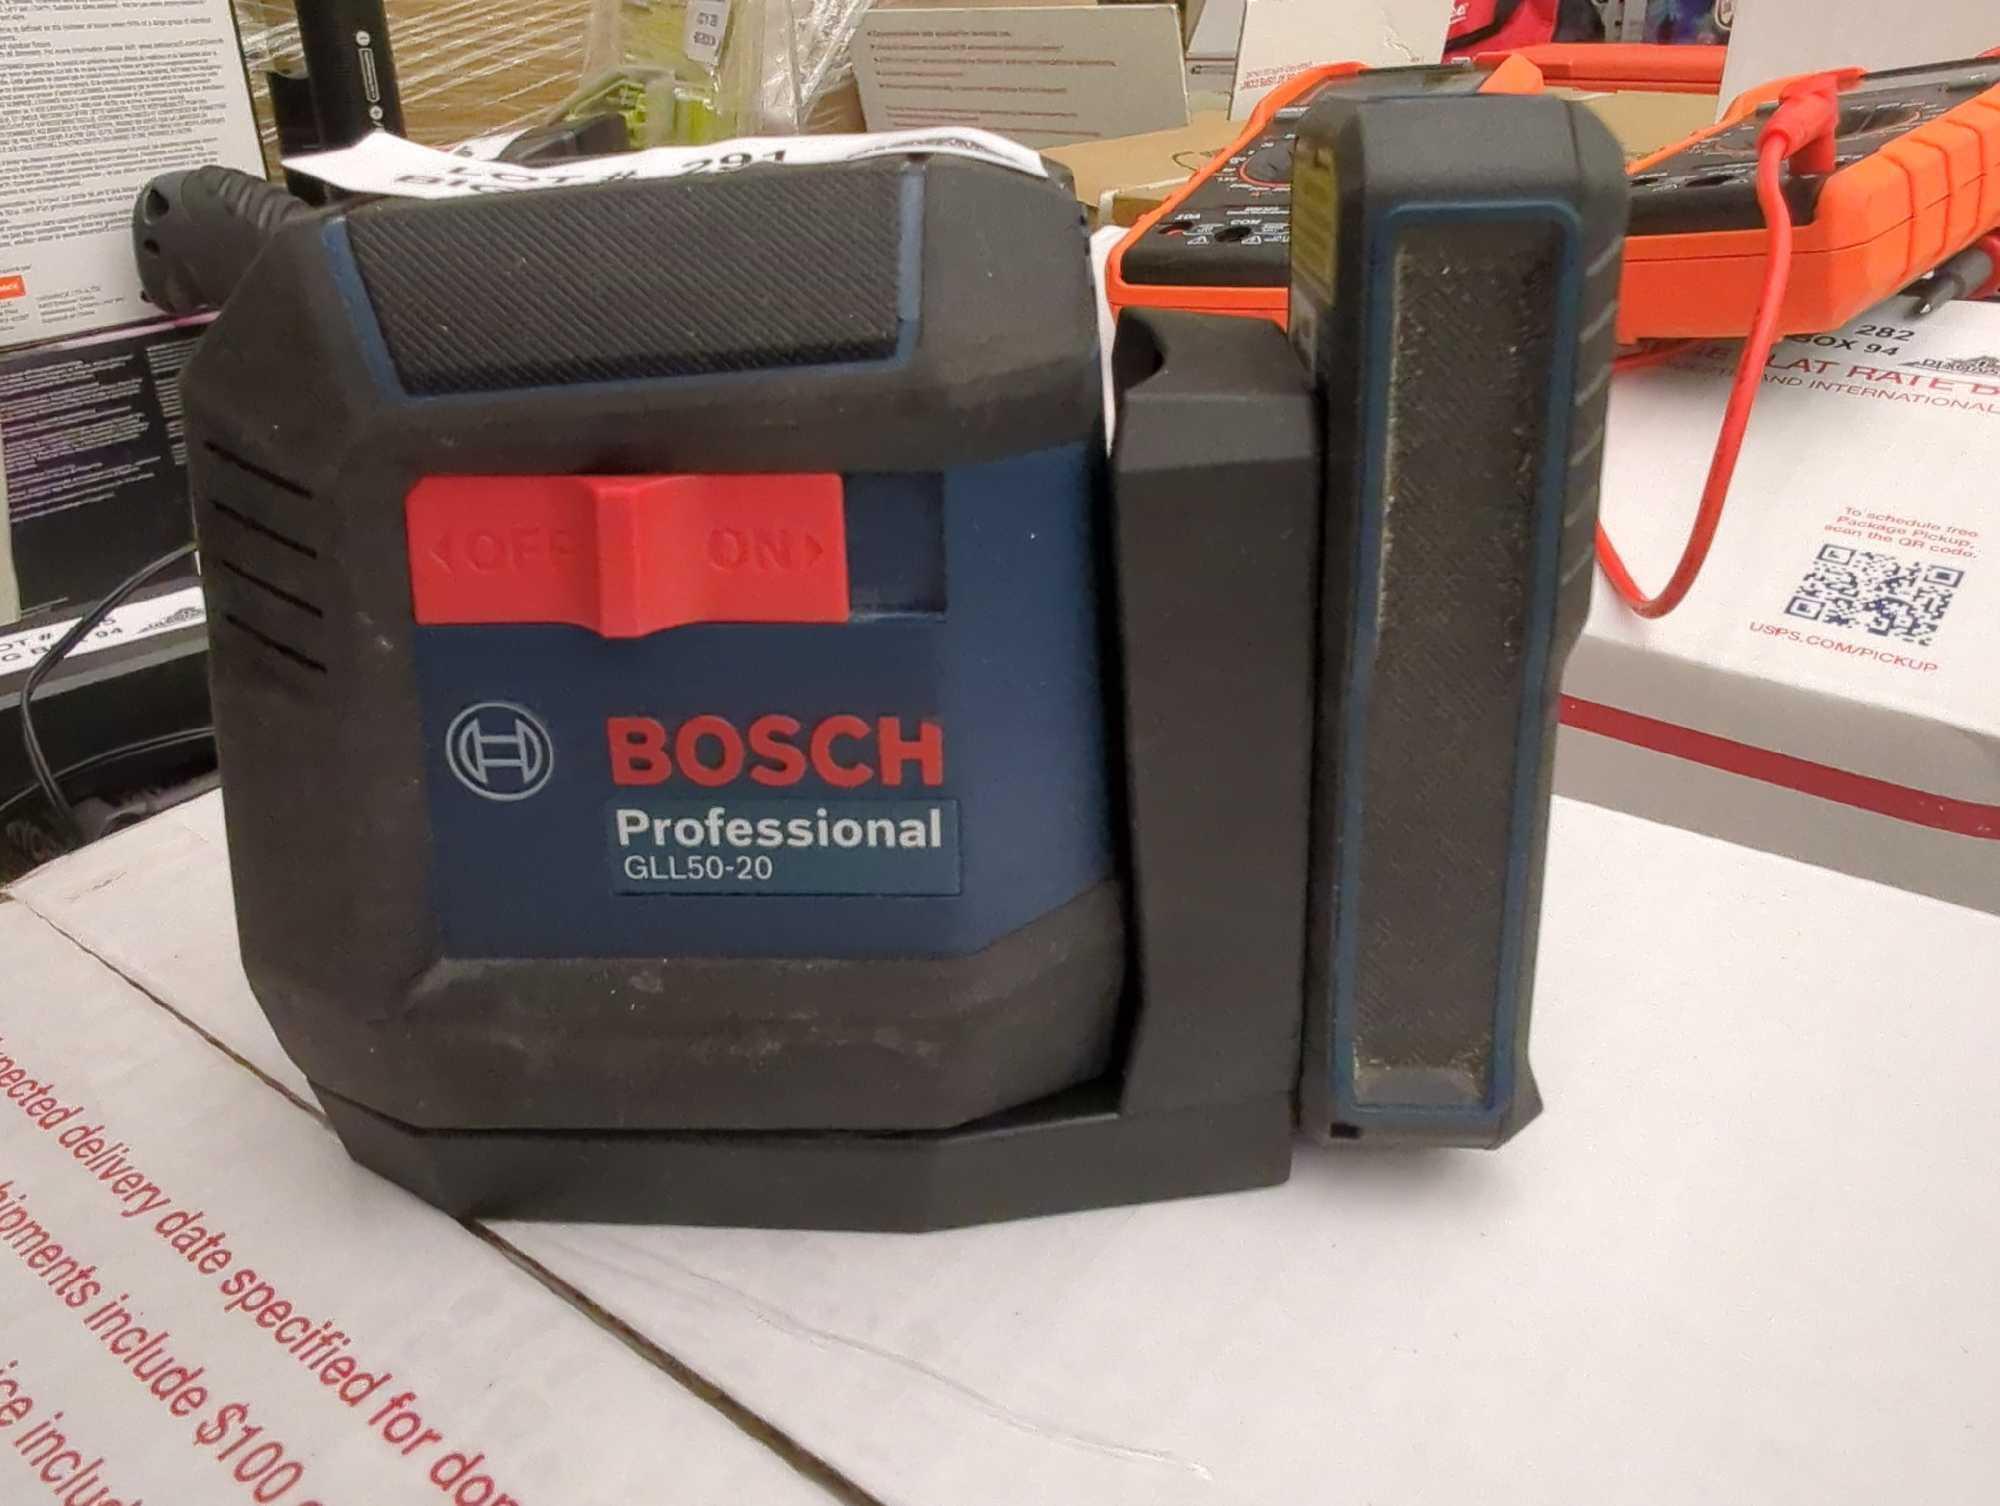 Lot of 2 Bosch Items to Include, 65 ft. Dual Power Battery Red Beam Self-Leveling Cross-Line Laser